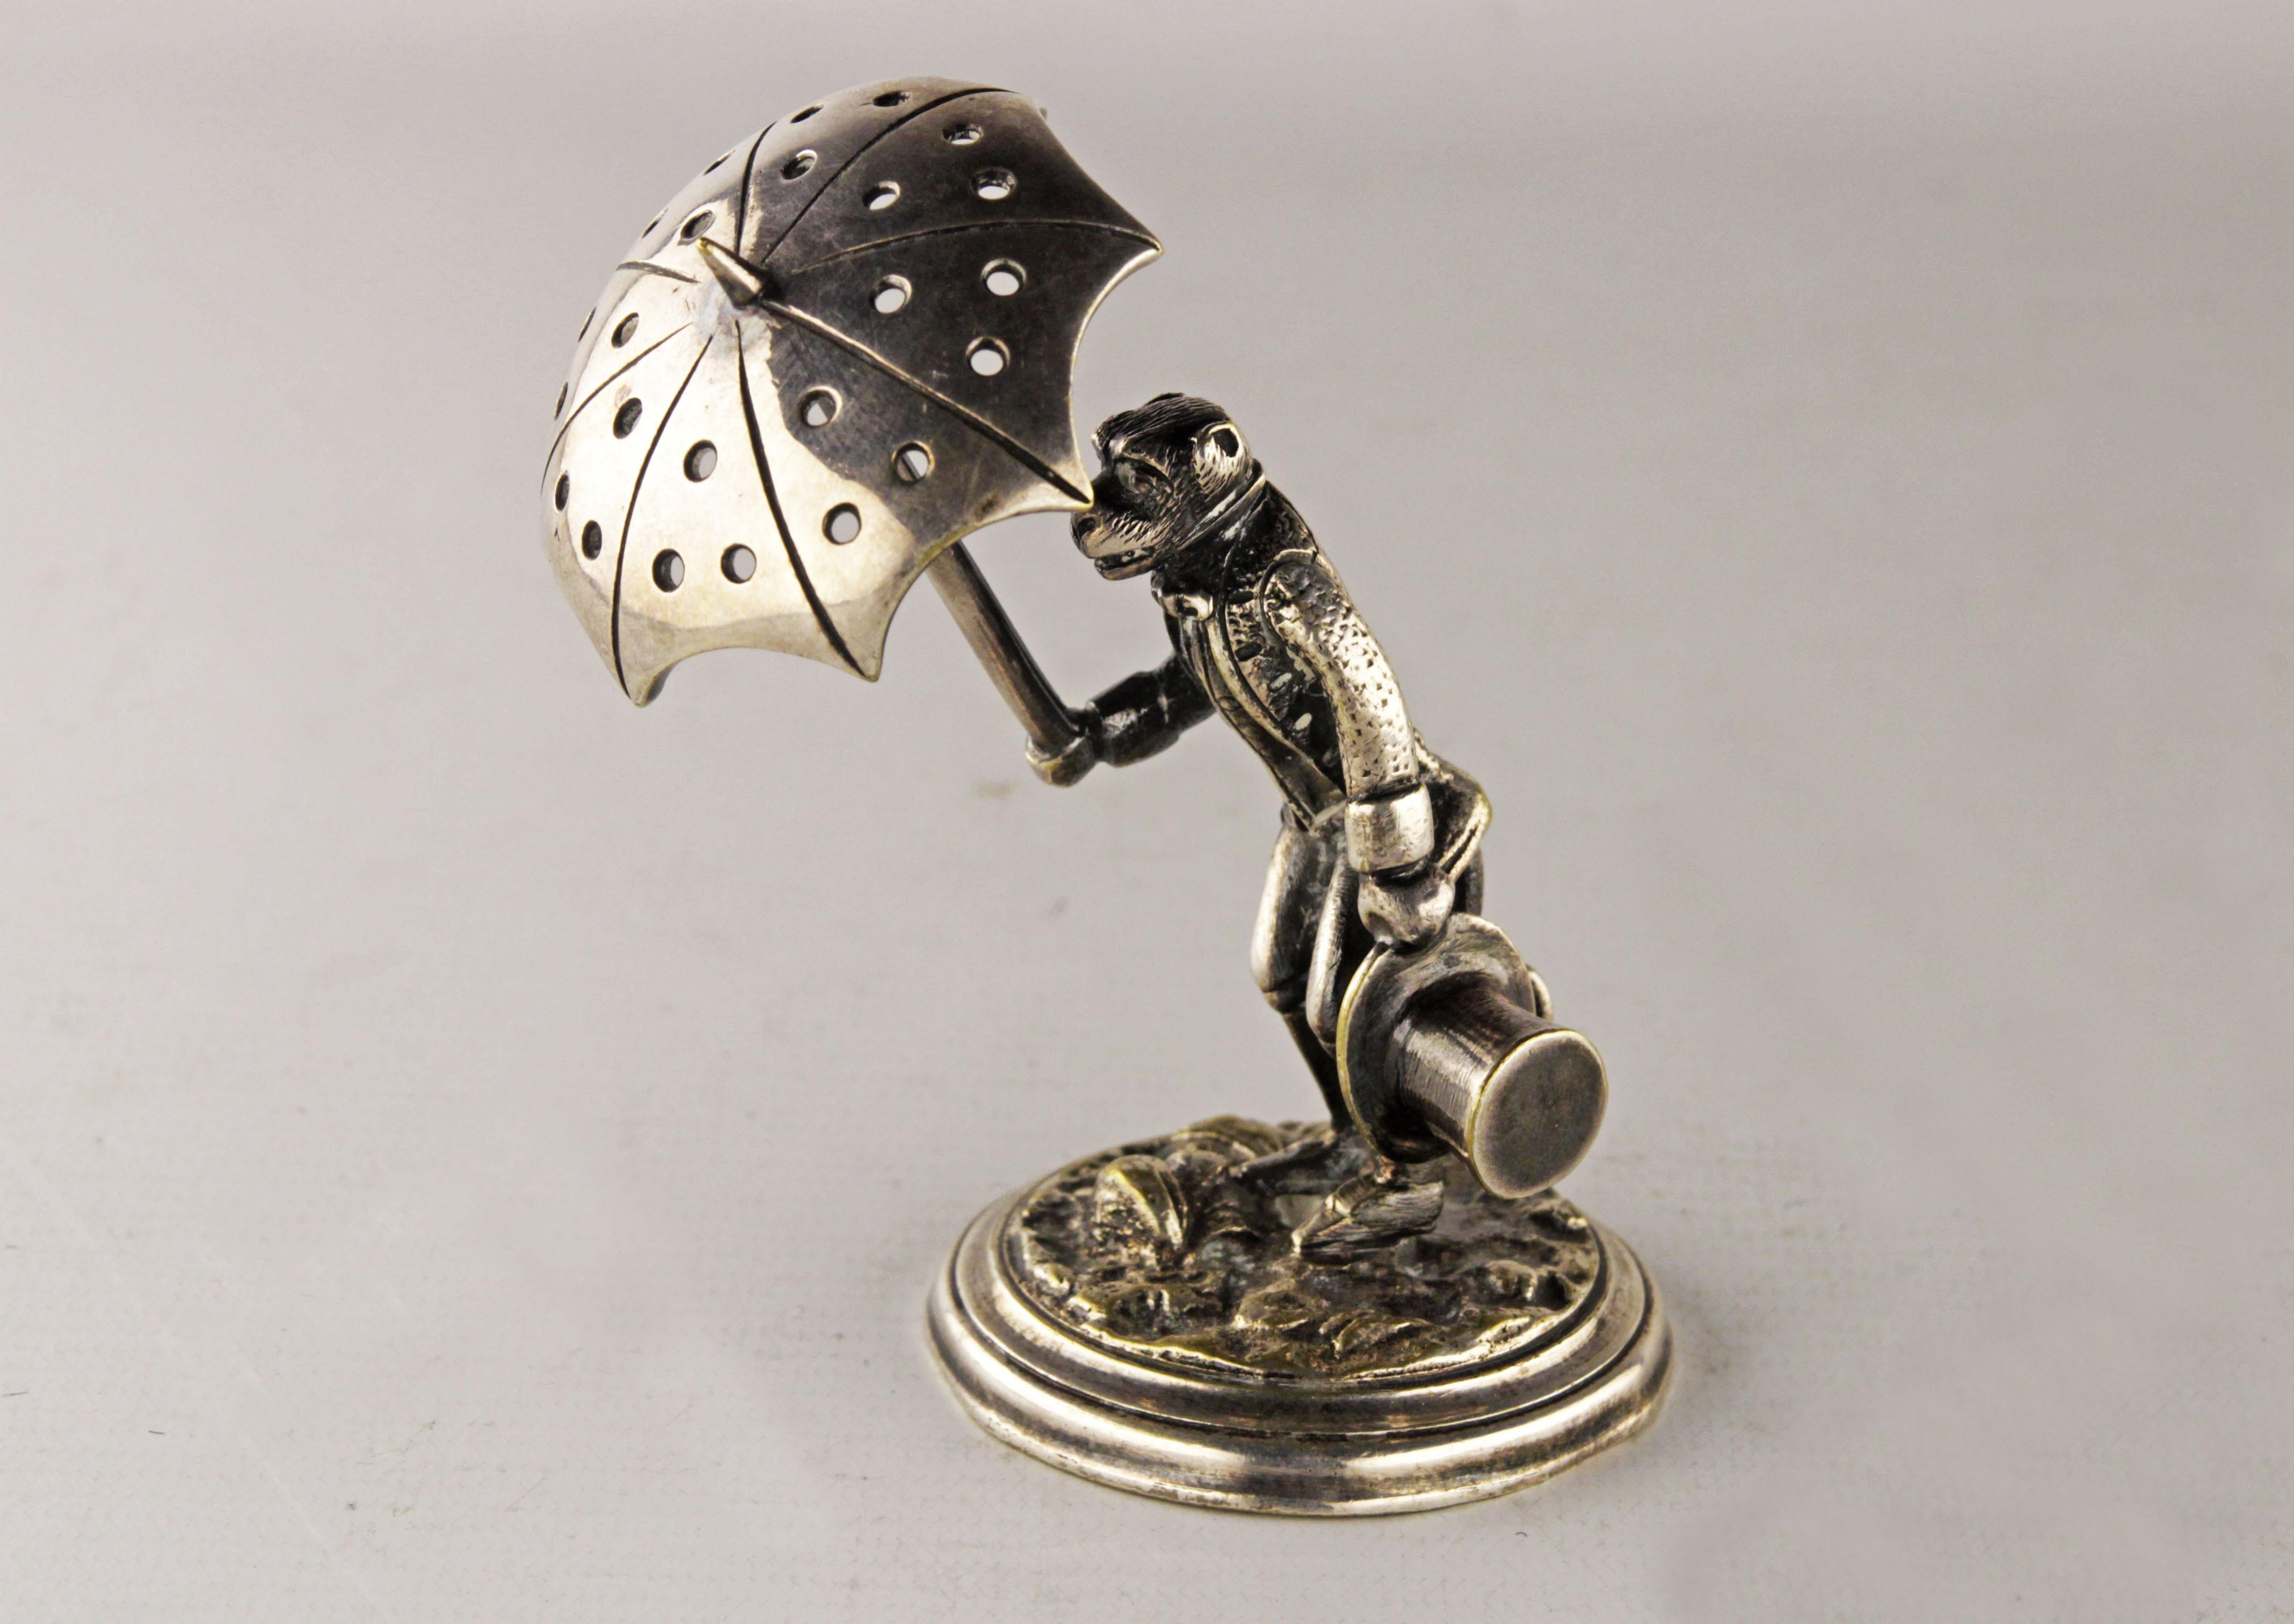 Silvered bronze toothpick holder of dressed monkey with umbrella and top-hat

By: unknown
Material: bronze, silver, metal, copper
Technique: cast, patinated, silvered, molded, polished, metalwork
Dimensions: 3.5 in x 2.5 in x 4 in
Date: late 19th